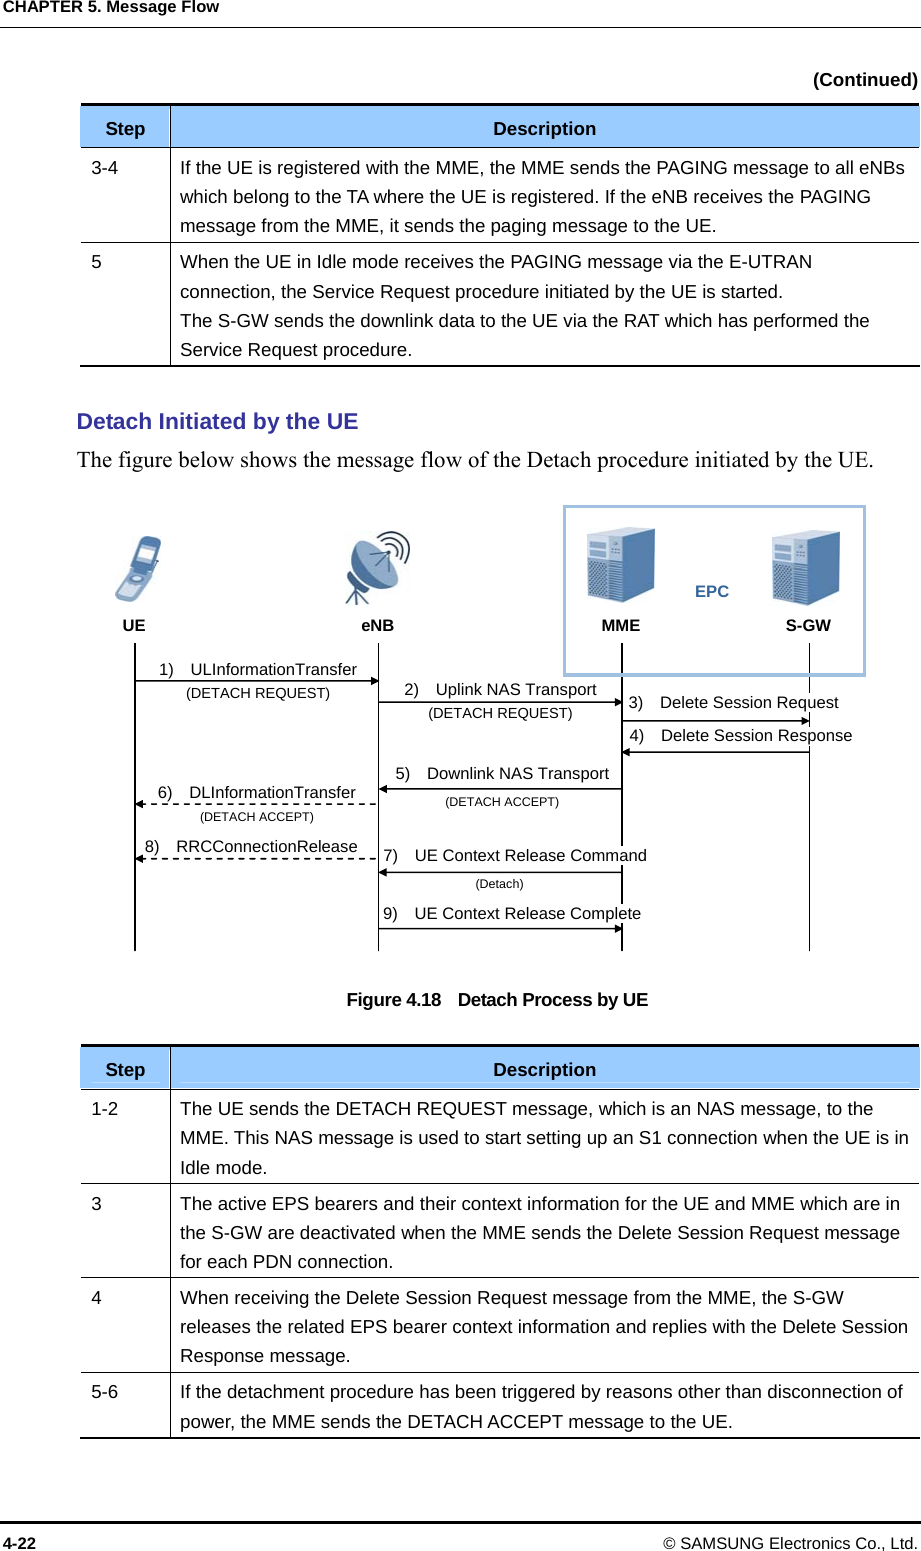 CHAPTER 5. Message Flow 4-22 © SAMSUNG Electronics Co., Ltd.  (Continued) Step  Description 3-4  If the UE is registered with the MME, the MME sends the PAGING message to all eNBs which belong to the TA where the UE is registered. If the eNB receives the PAGING message from the MME, it sends the paging message to the UE. 5  When the UE in Idle mode receives the PAGING message via the E-UTRAN connection, the Service Request procedure initiated by the UE is started.   The S-GW sends the downlink data to the UE via the RAT which has performed the Service Request procedure.  Detach Initiated by the UE The figure below shows the message flow of the Detach procedure initiated by the UE.  Figure 4.18    Detach Process by UE  Step  Description 1-2  The UE sends the DETACH REQUEST message, which is an NAS message, to the MME. This NAS message is used to start setting up an S1 connection when the UE is in Idle mode. 3  The active EPS bearers and their context information for the UE and MME which are in the S-GW are deactivated when the MME sends the Delete Session Request message for each PDN connection. 4  When receiving the Delete Session Request message from the MME, the S-GW releases the related EPS bearer context information and replies with the Delete Session Response message. 5-6  If the detachment procedure has been triggered by reasons other than disconnection of power, the MME sends the DETACH ACCEPT message to the UE. UE  eNB MME  S-GW EPC 1)  ULInformationTransfer (DETACH REQUEST) 3)  Delete Session Request 2)  Uplink NAS Transport (DETACH REQUEST) 4)  Delete Session Response 5)  Downlink NAS Transport (DETACH ACCEPT) 7)  UE Context Release Command 9)  UE Context Release Complete 6)  DLInformationTransfer (DETACH ACCEPT) 8)  RRCConnectionRelease (Detach) 